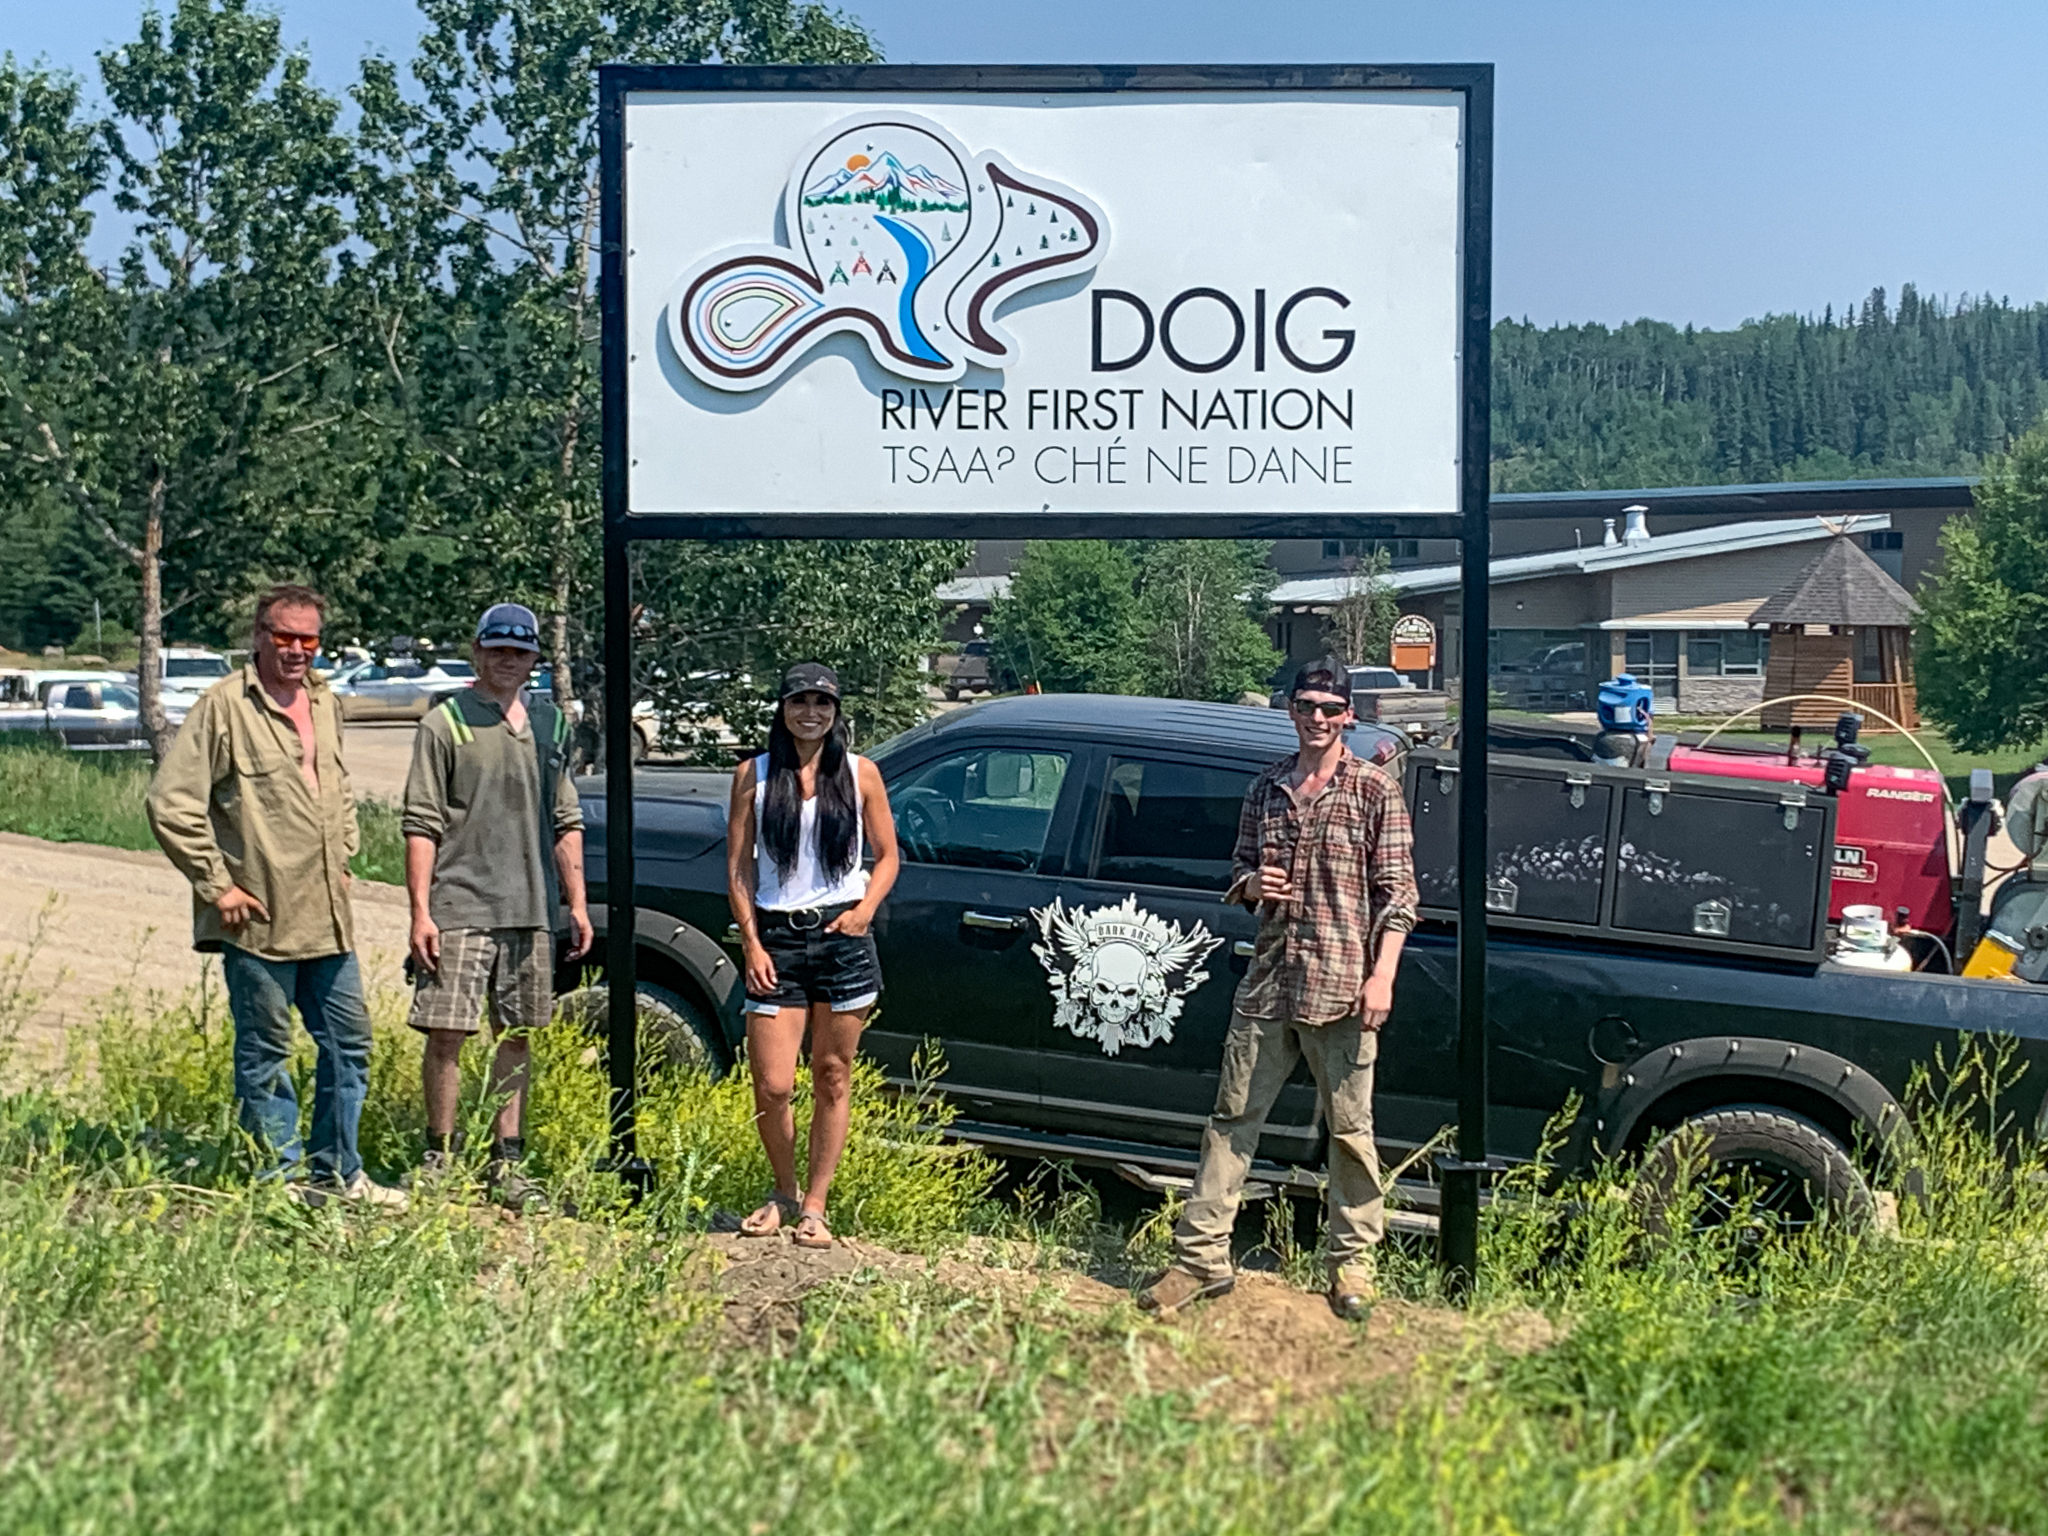 Connecting with the Doig River First Nation community